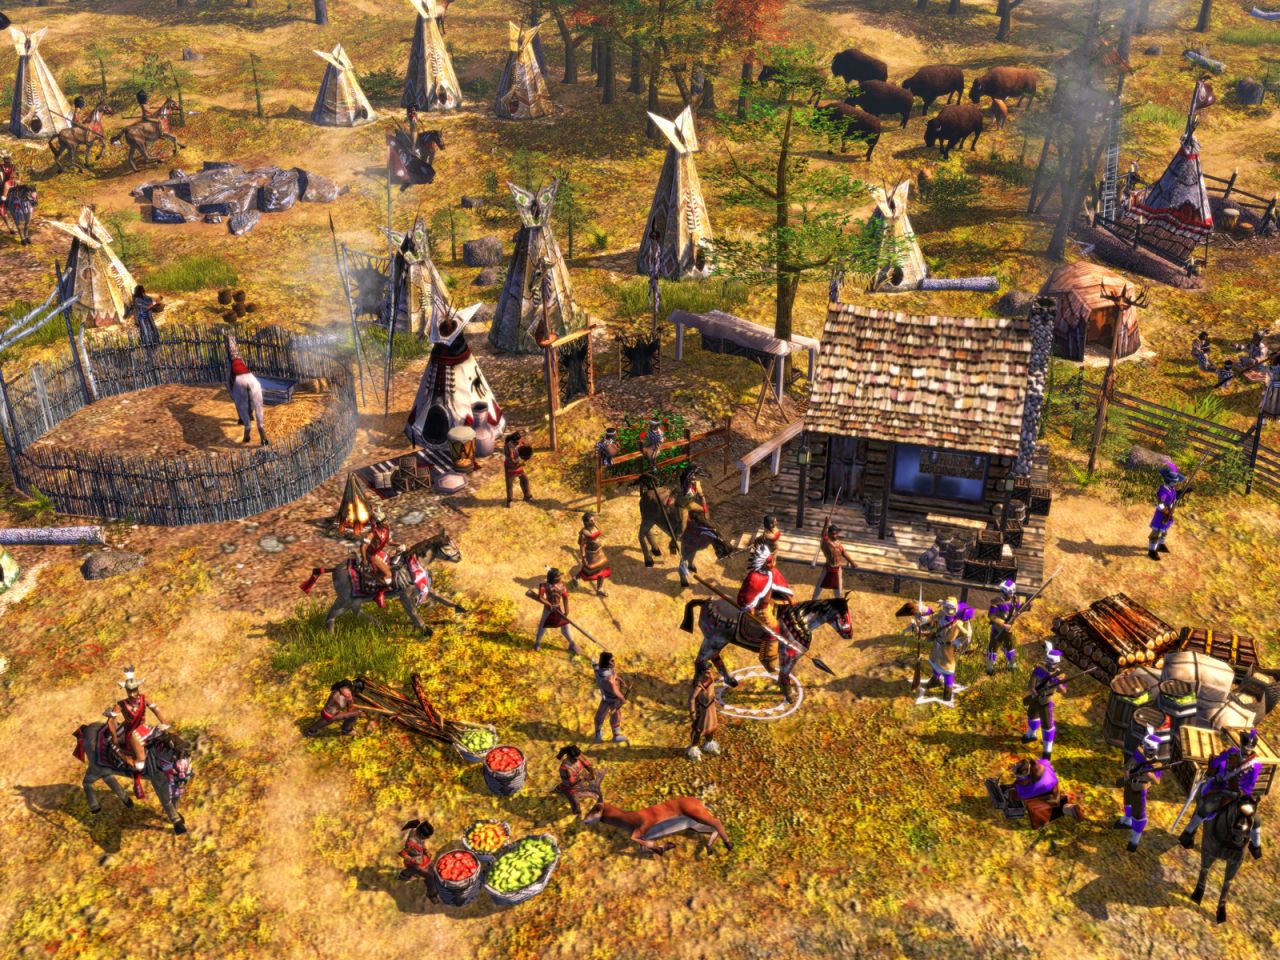 Download game pc age of empires 3 full version